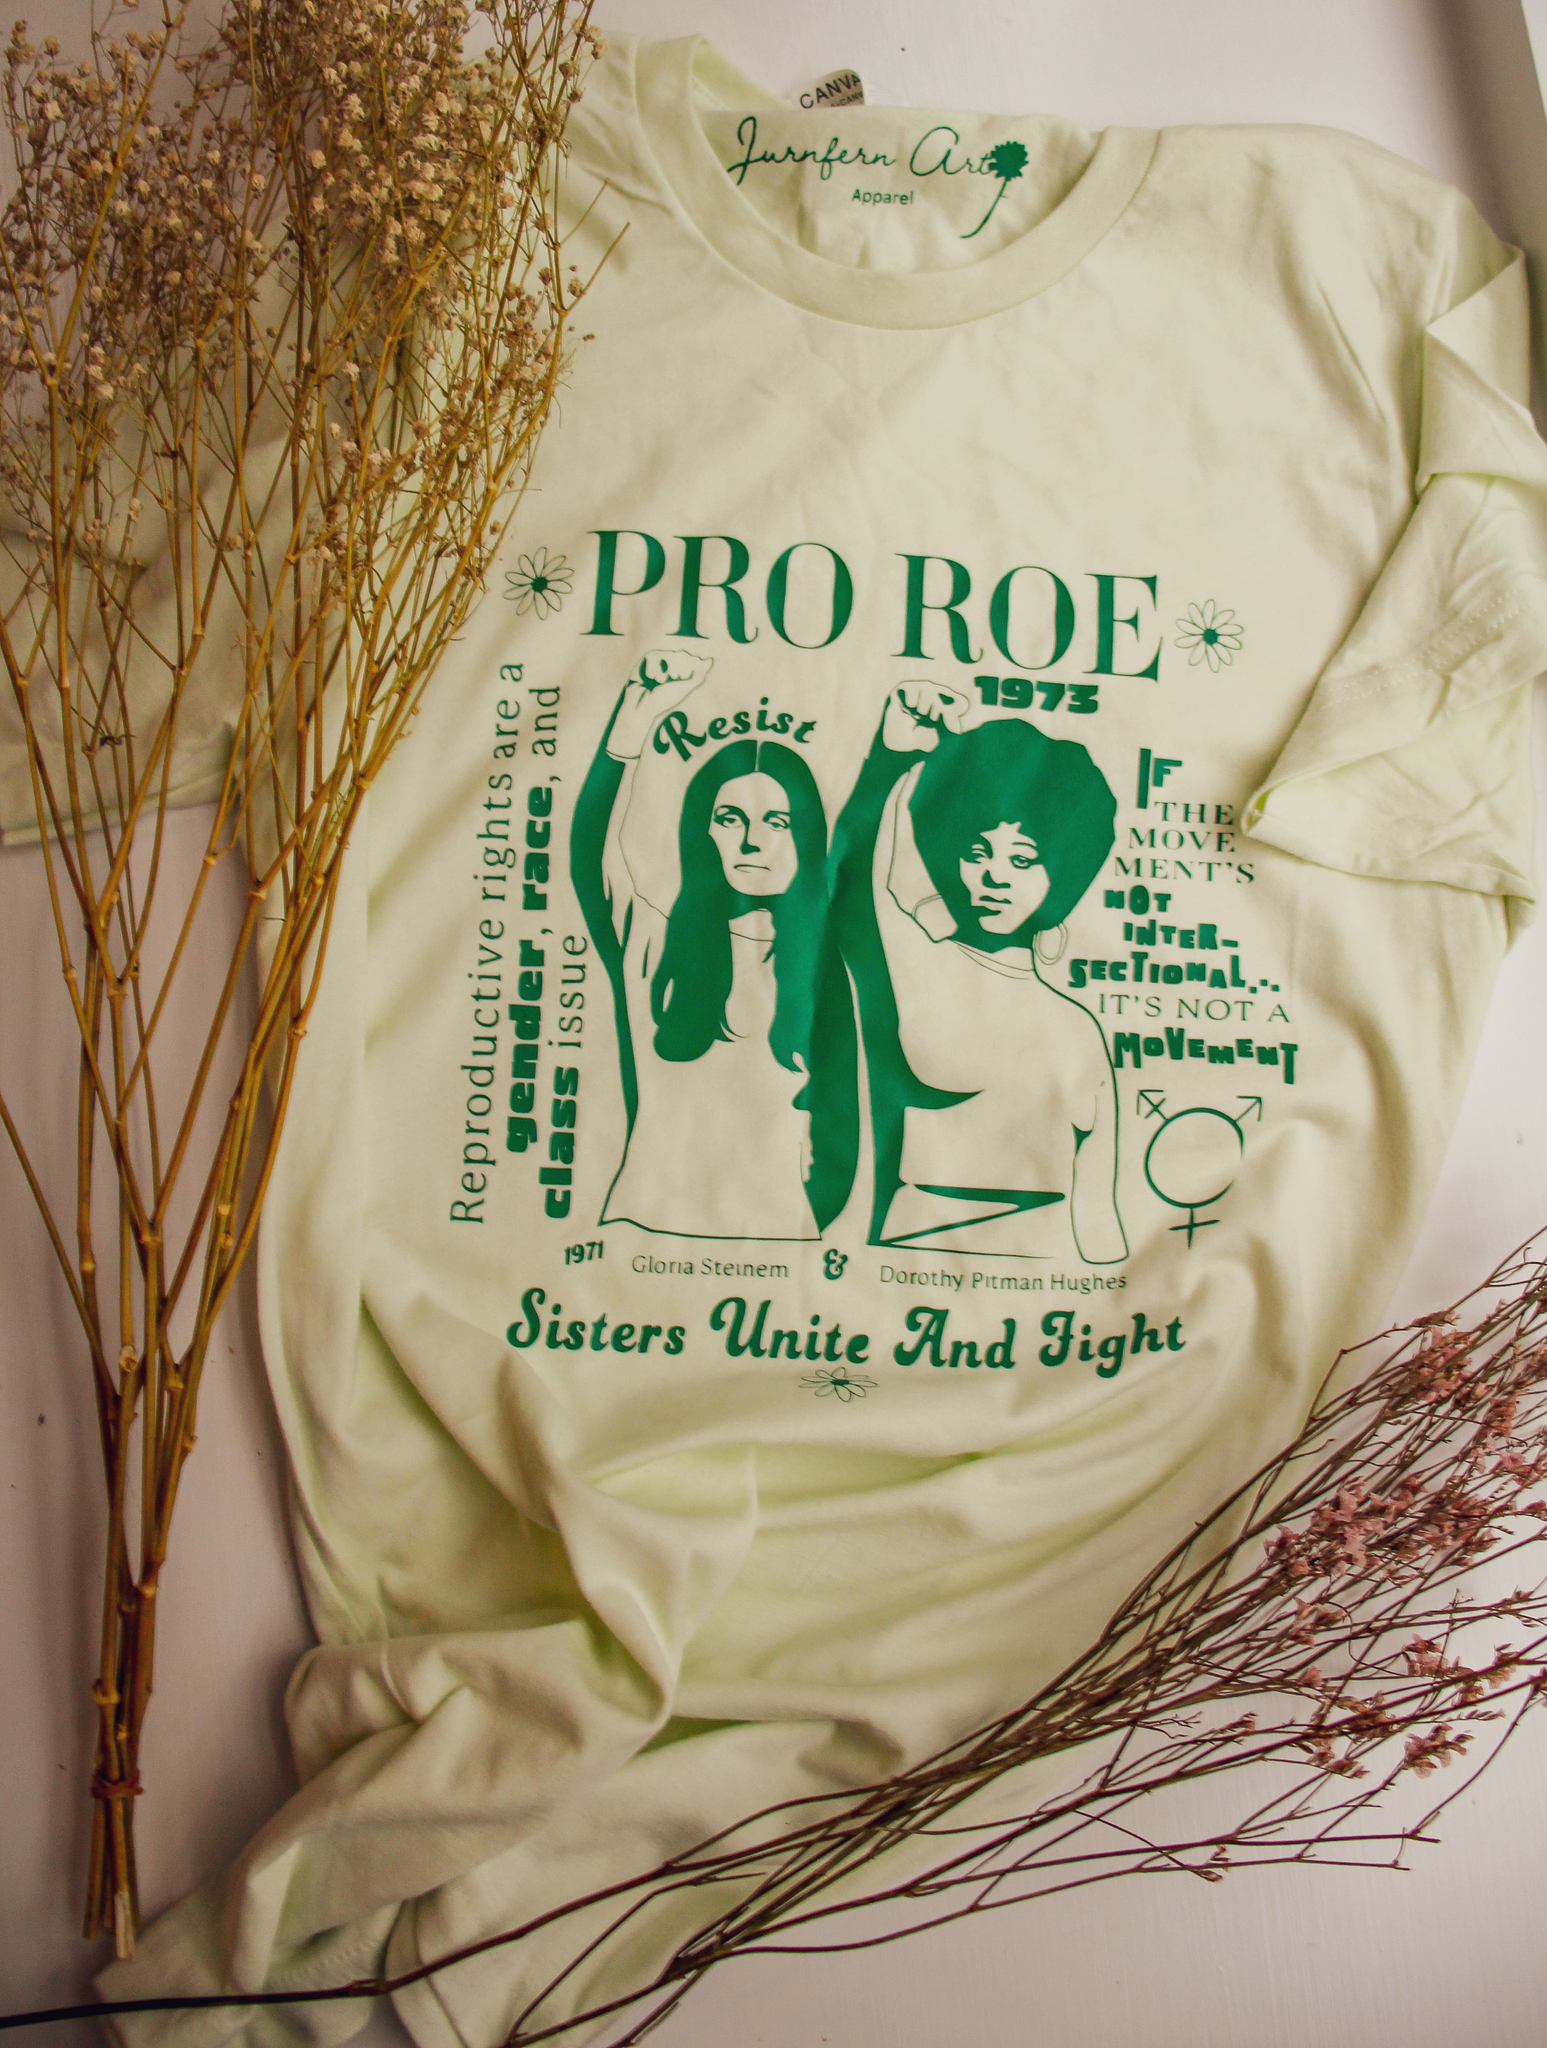 A t-shirt with an image on it of Gloria Steinem and Dorothy Pitman and text that reads 'PRO ROE,' surrounded by dry flowers